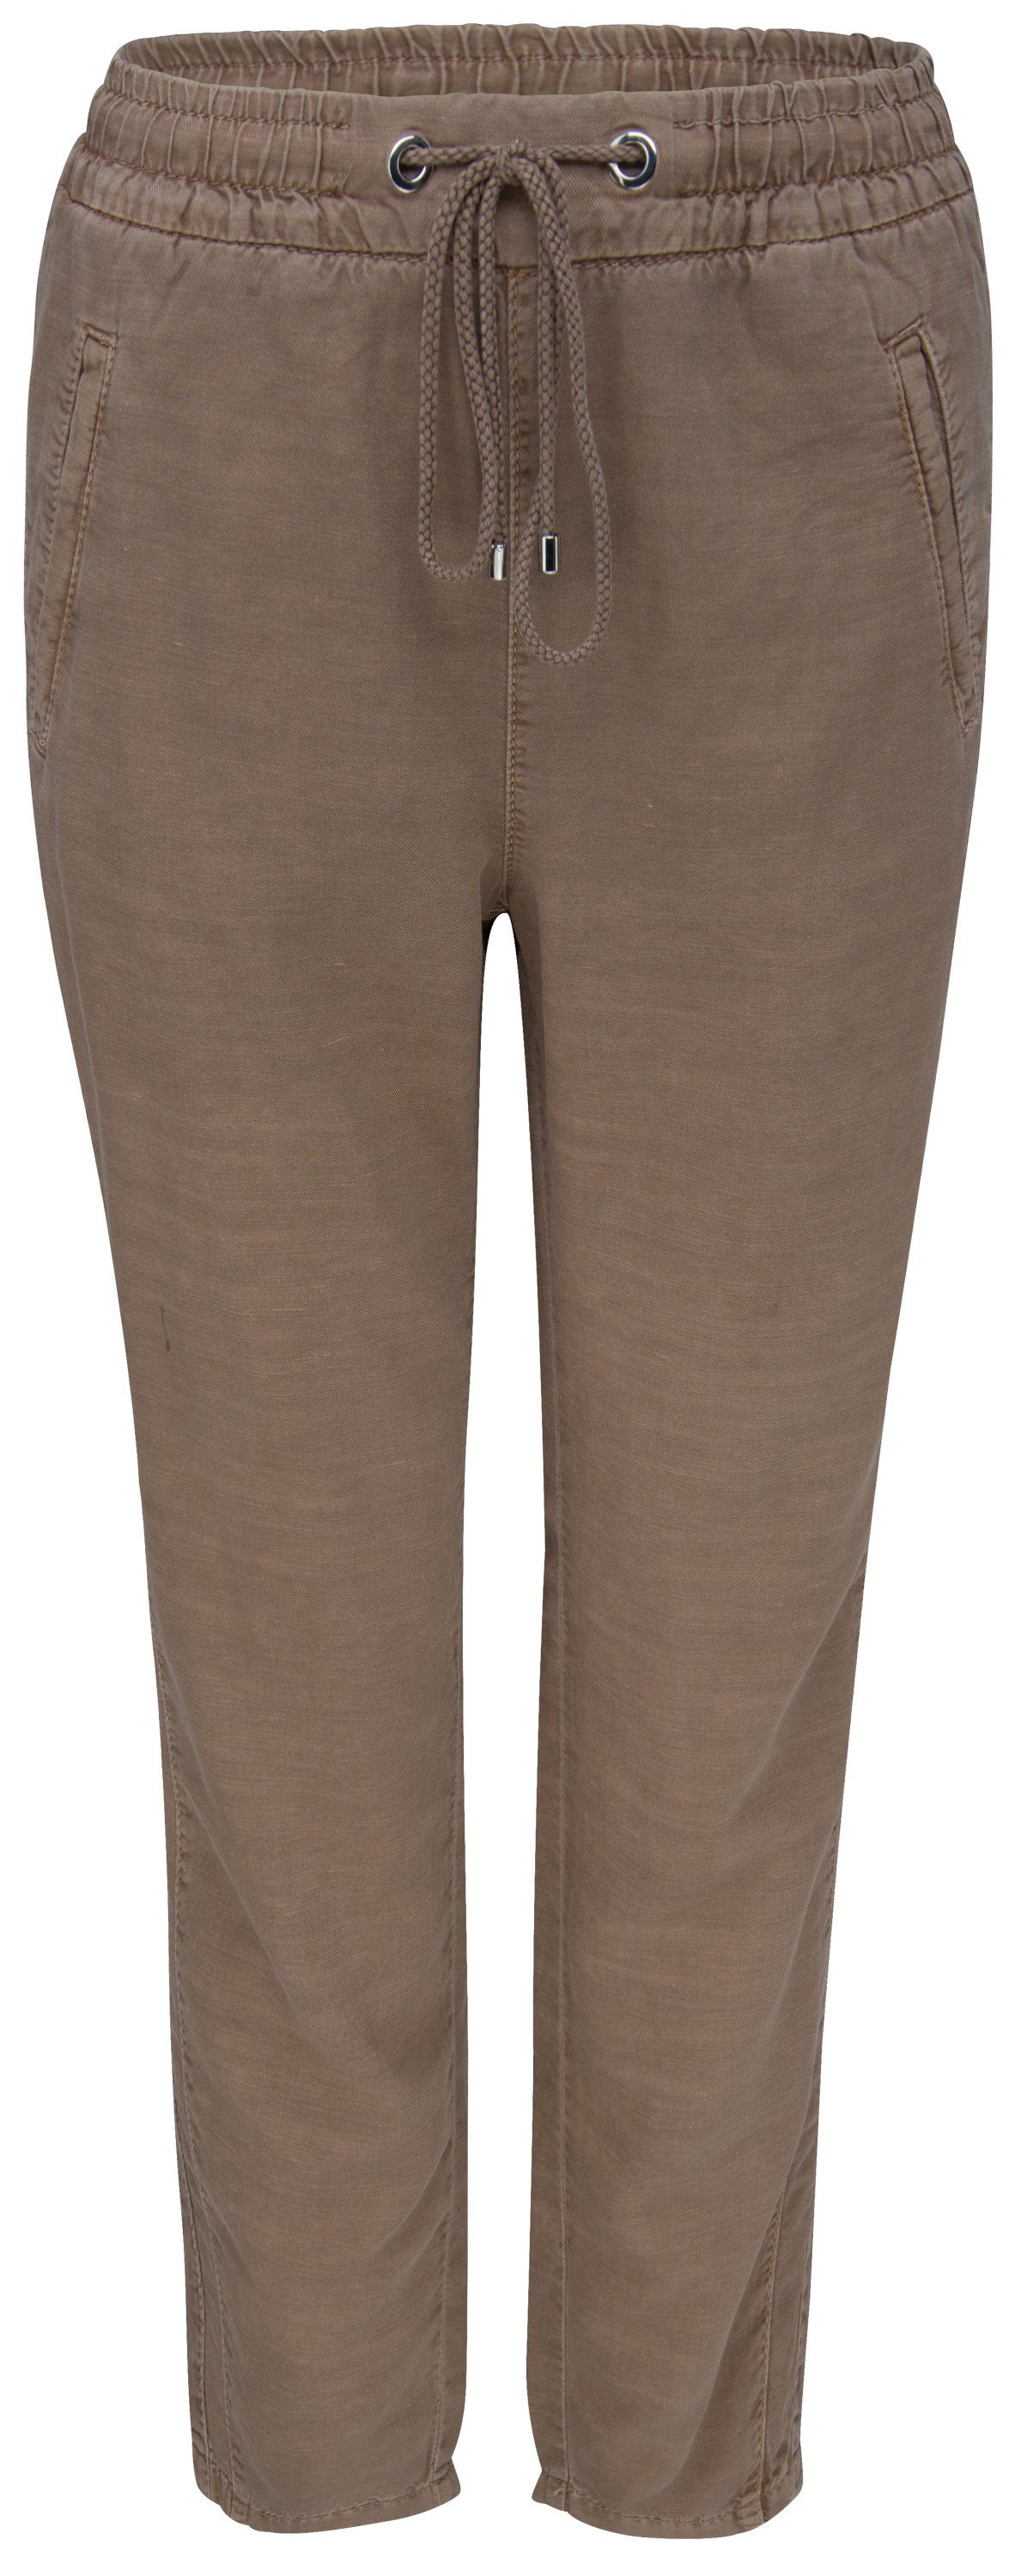 MAC Stretch-Jeans MAC EASY chino ocher brown 2786-00-0214L-244R 244R taupe PPT